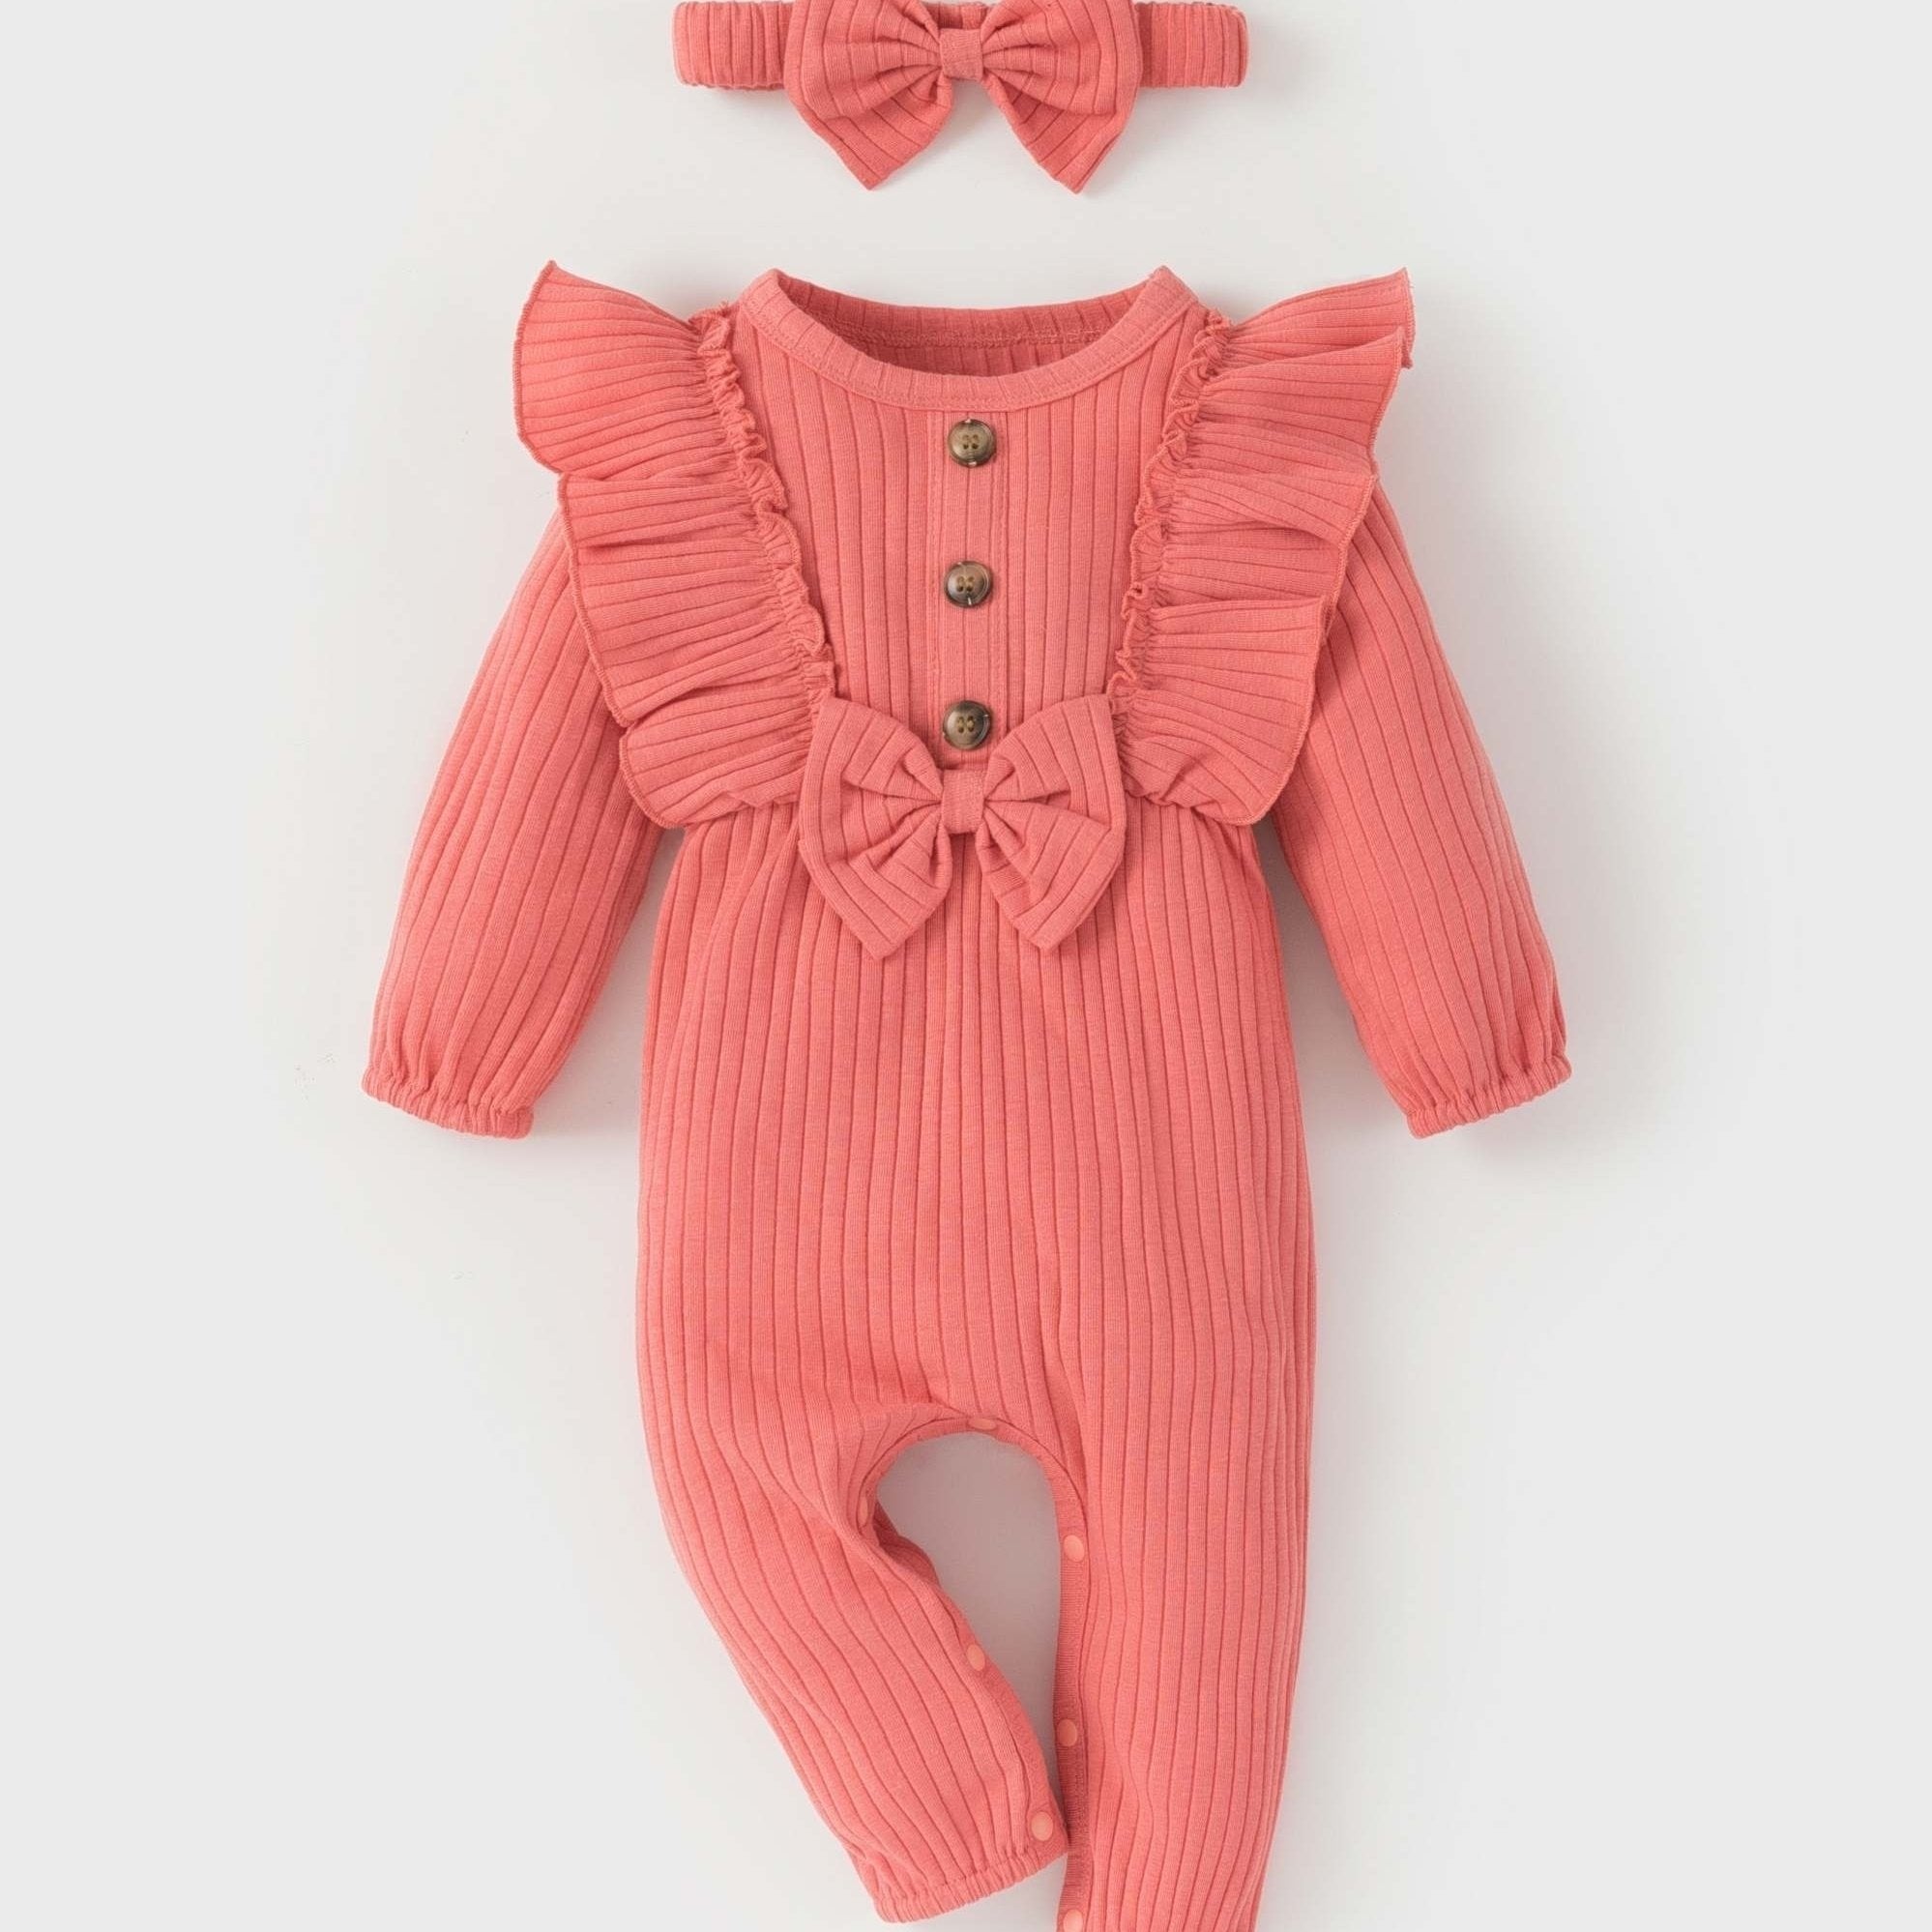 Adorable Baby Girls Long Sleeve Ruffle Romper with Bowknot - Soft 2 - Piece Set Including Matching Headband - Perfect Casual & Cute Ensemble for Everyday Wear - Ammpoure Wellbeing